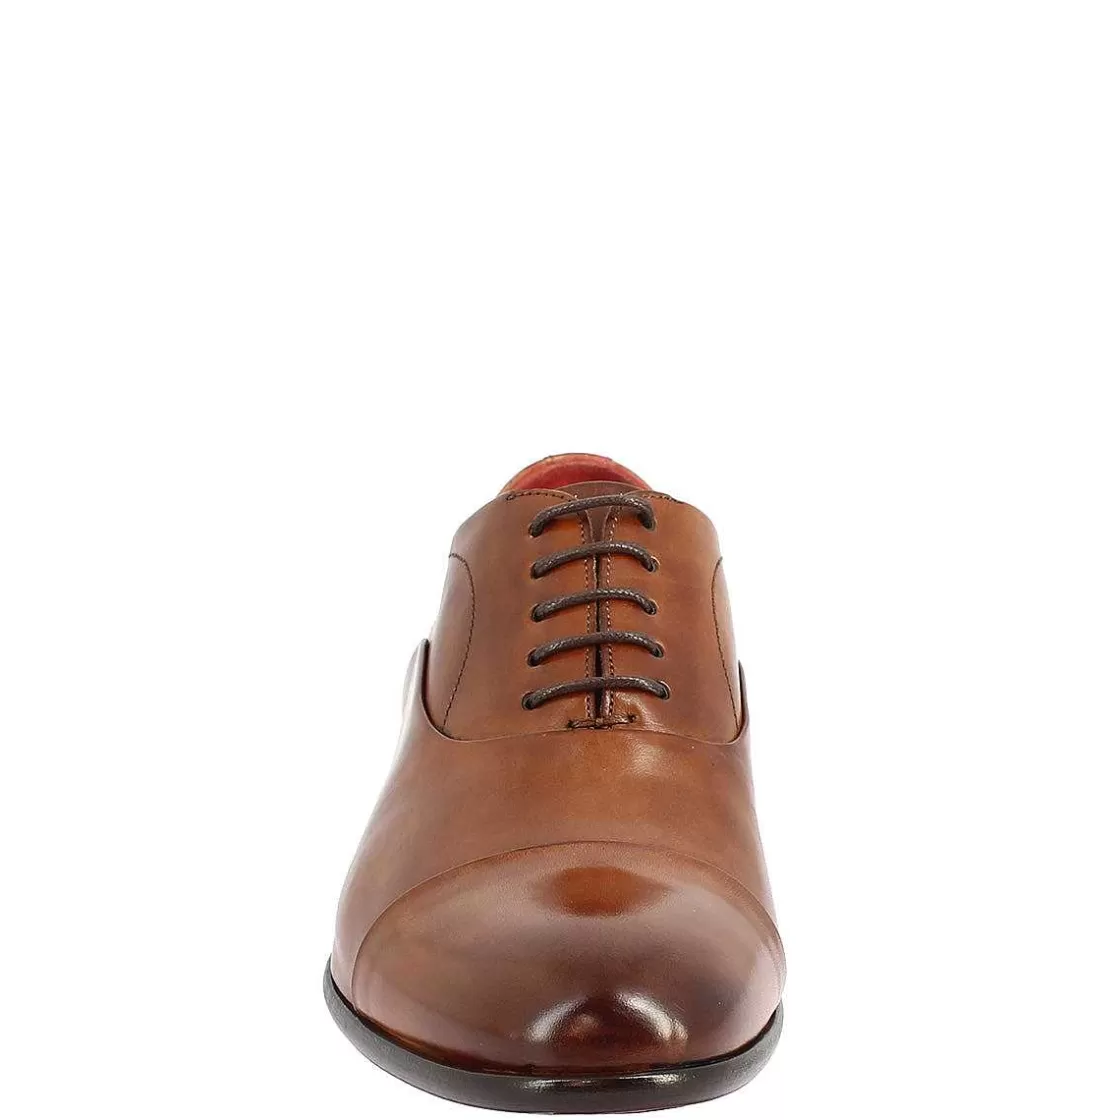 Leonardo Men'S Lace-Up Shoes Handmade In Brandy Leather Outlet